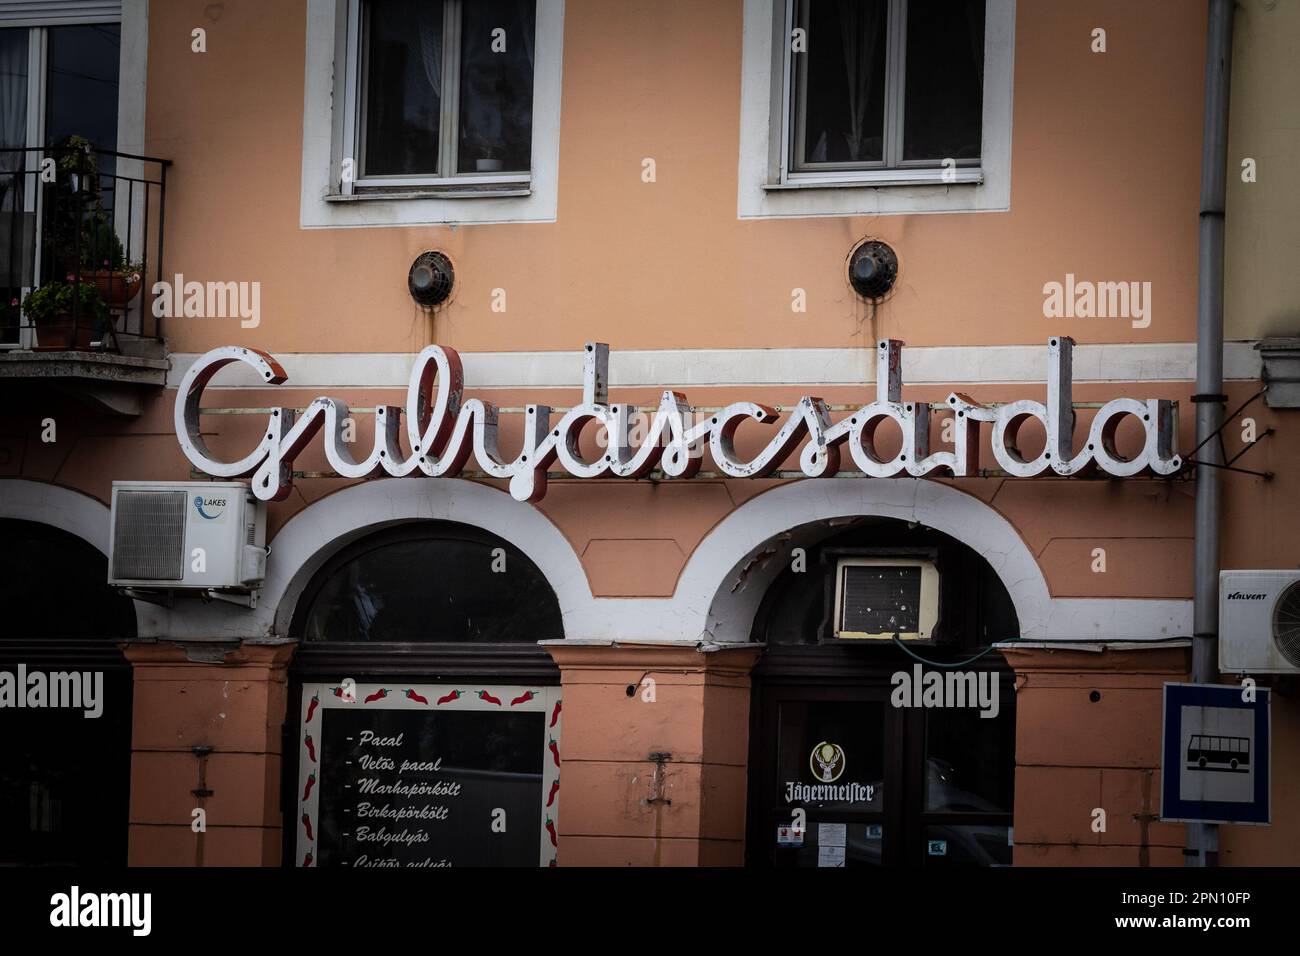 Picture of a sign with the Word gulyascsarda, a restaurant specialized in Gulash, in Szeged, Hungary. Stock Photo